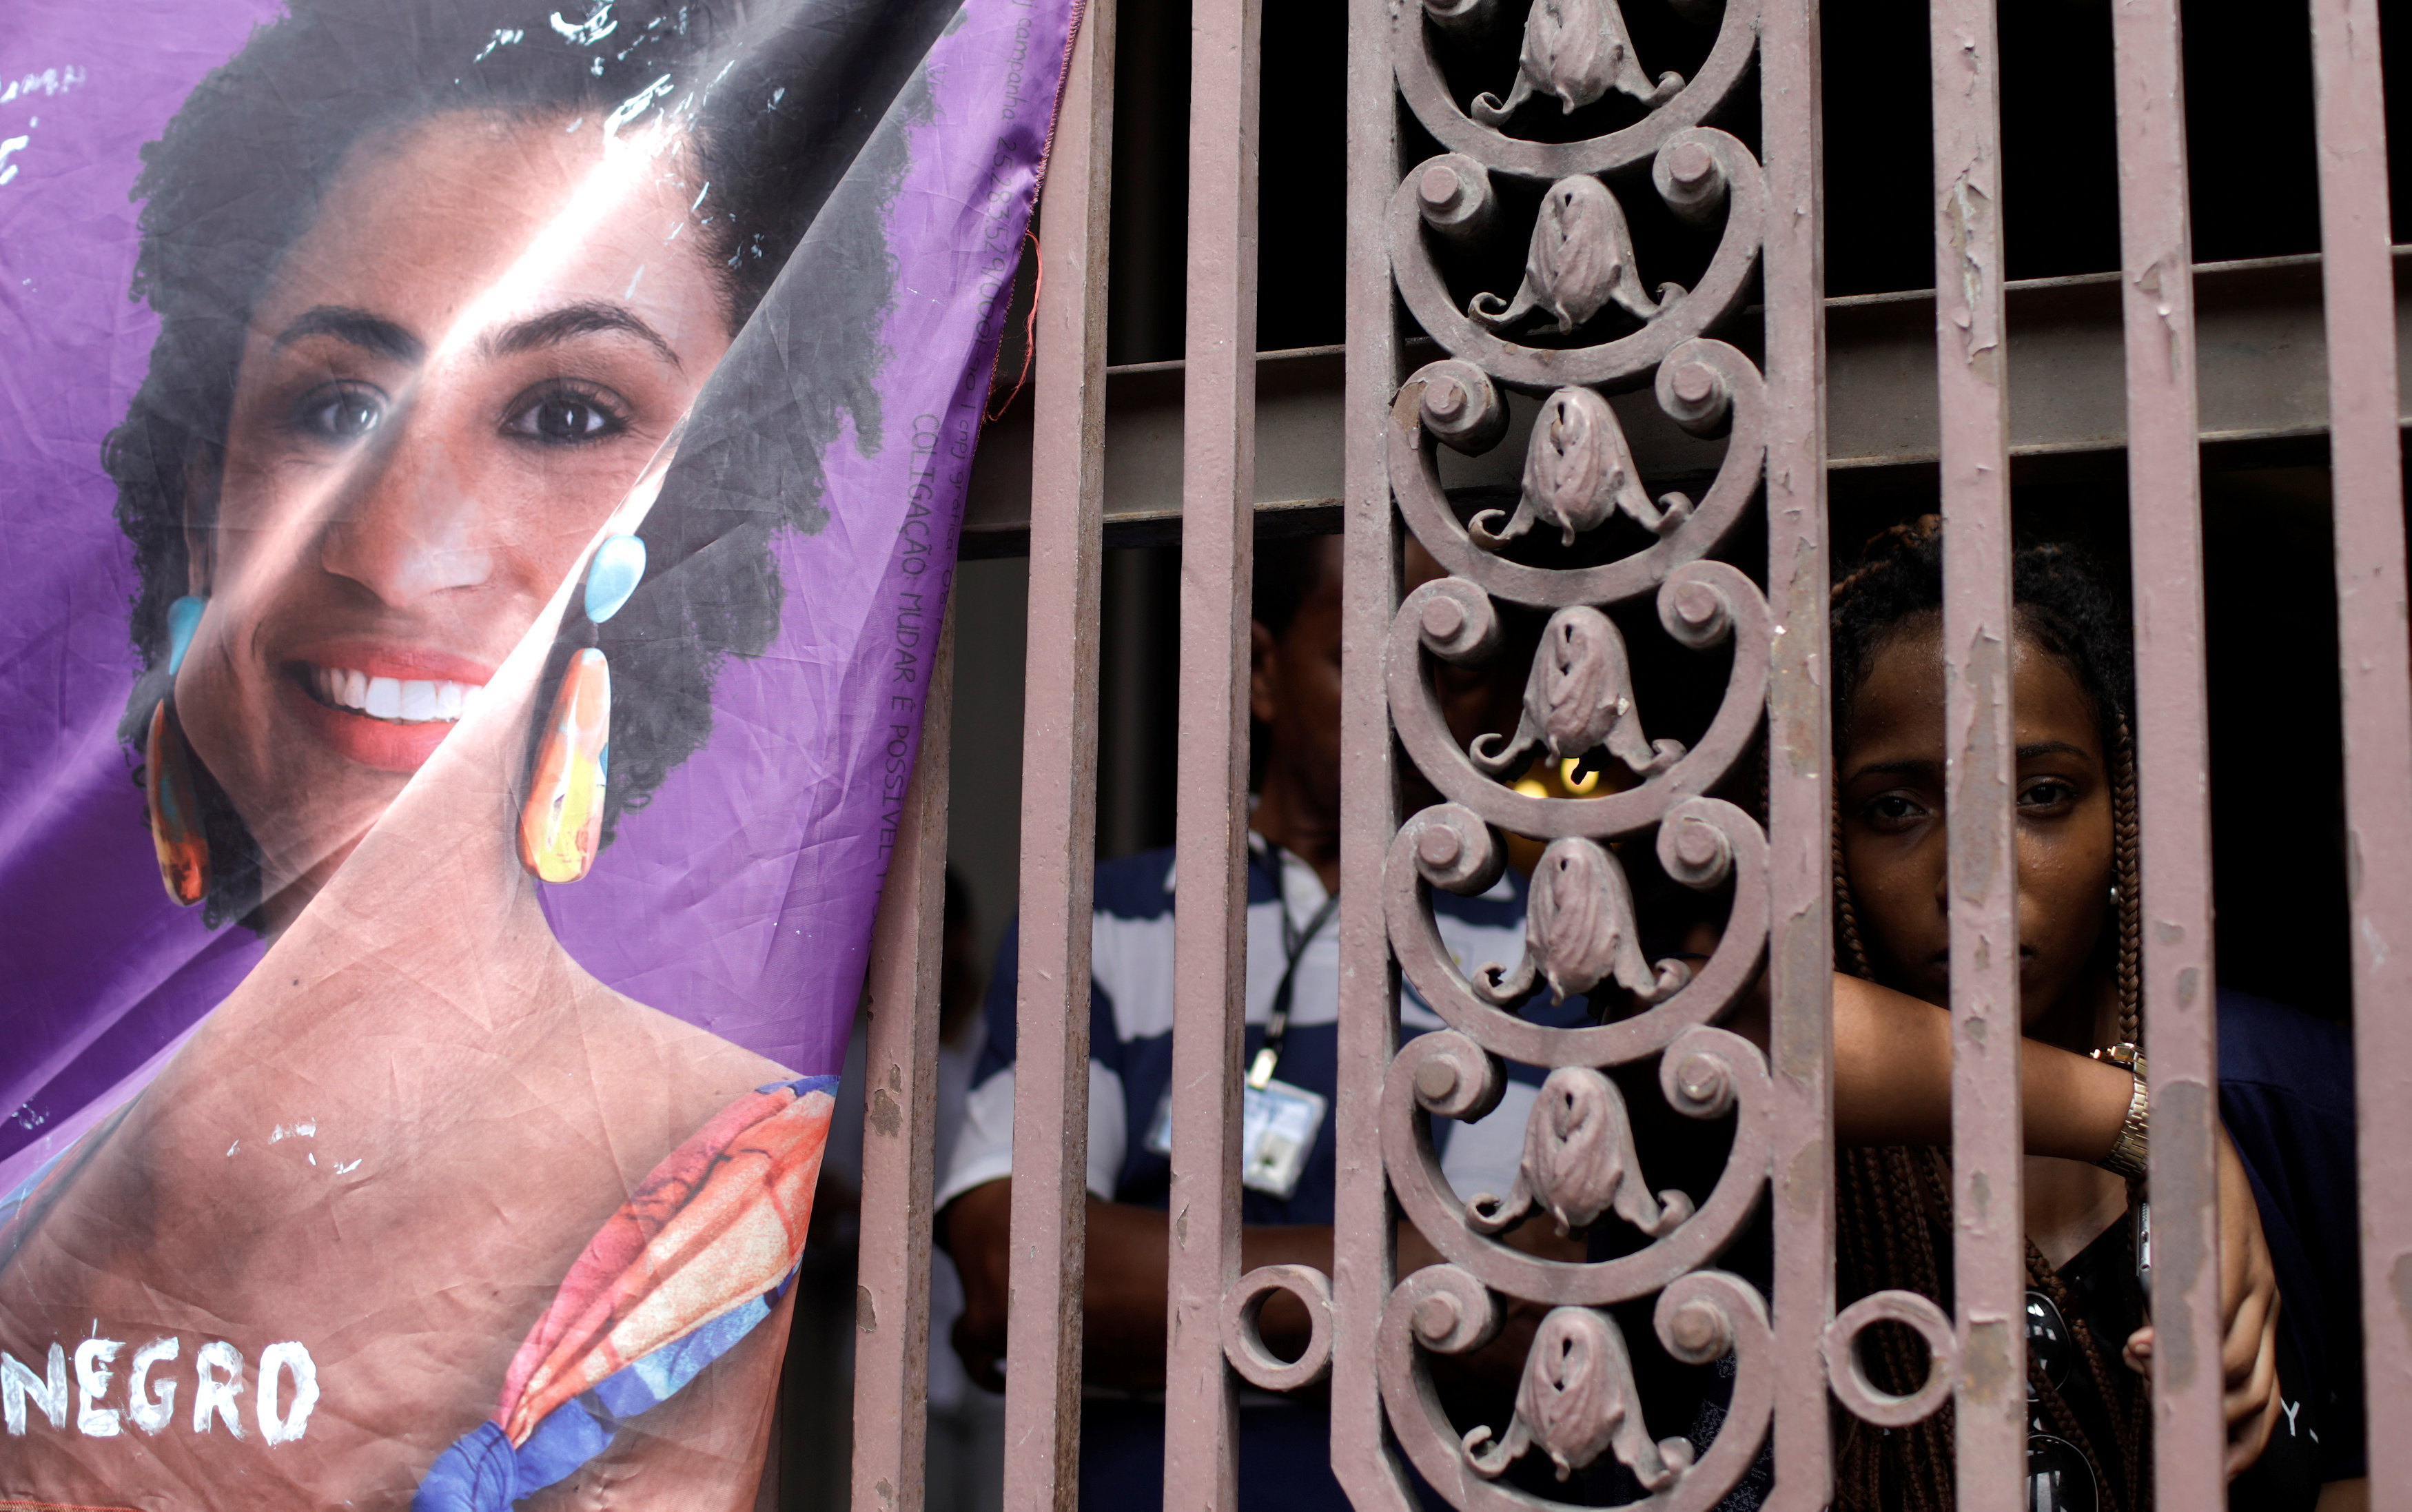 A woman reacts next to a picture of the Rio de Janeiro city councillor Marielle Franco, 38, who was shot dead, during a demonstration ahead of her wake outside the city council chamber in Rio de Janeiro, Brazil March 15, 2018.